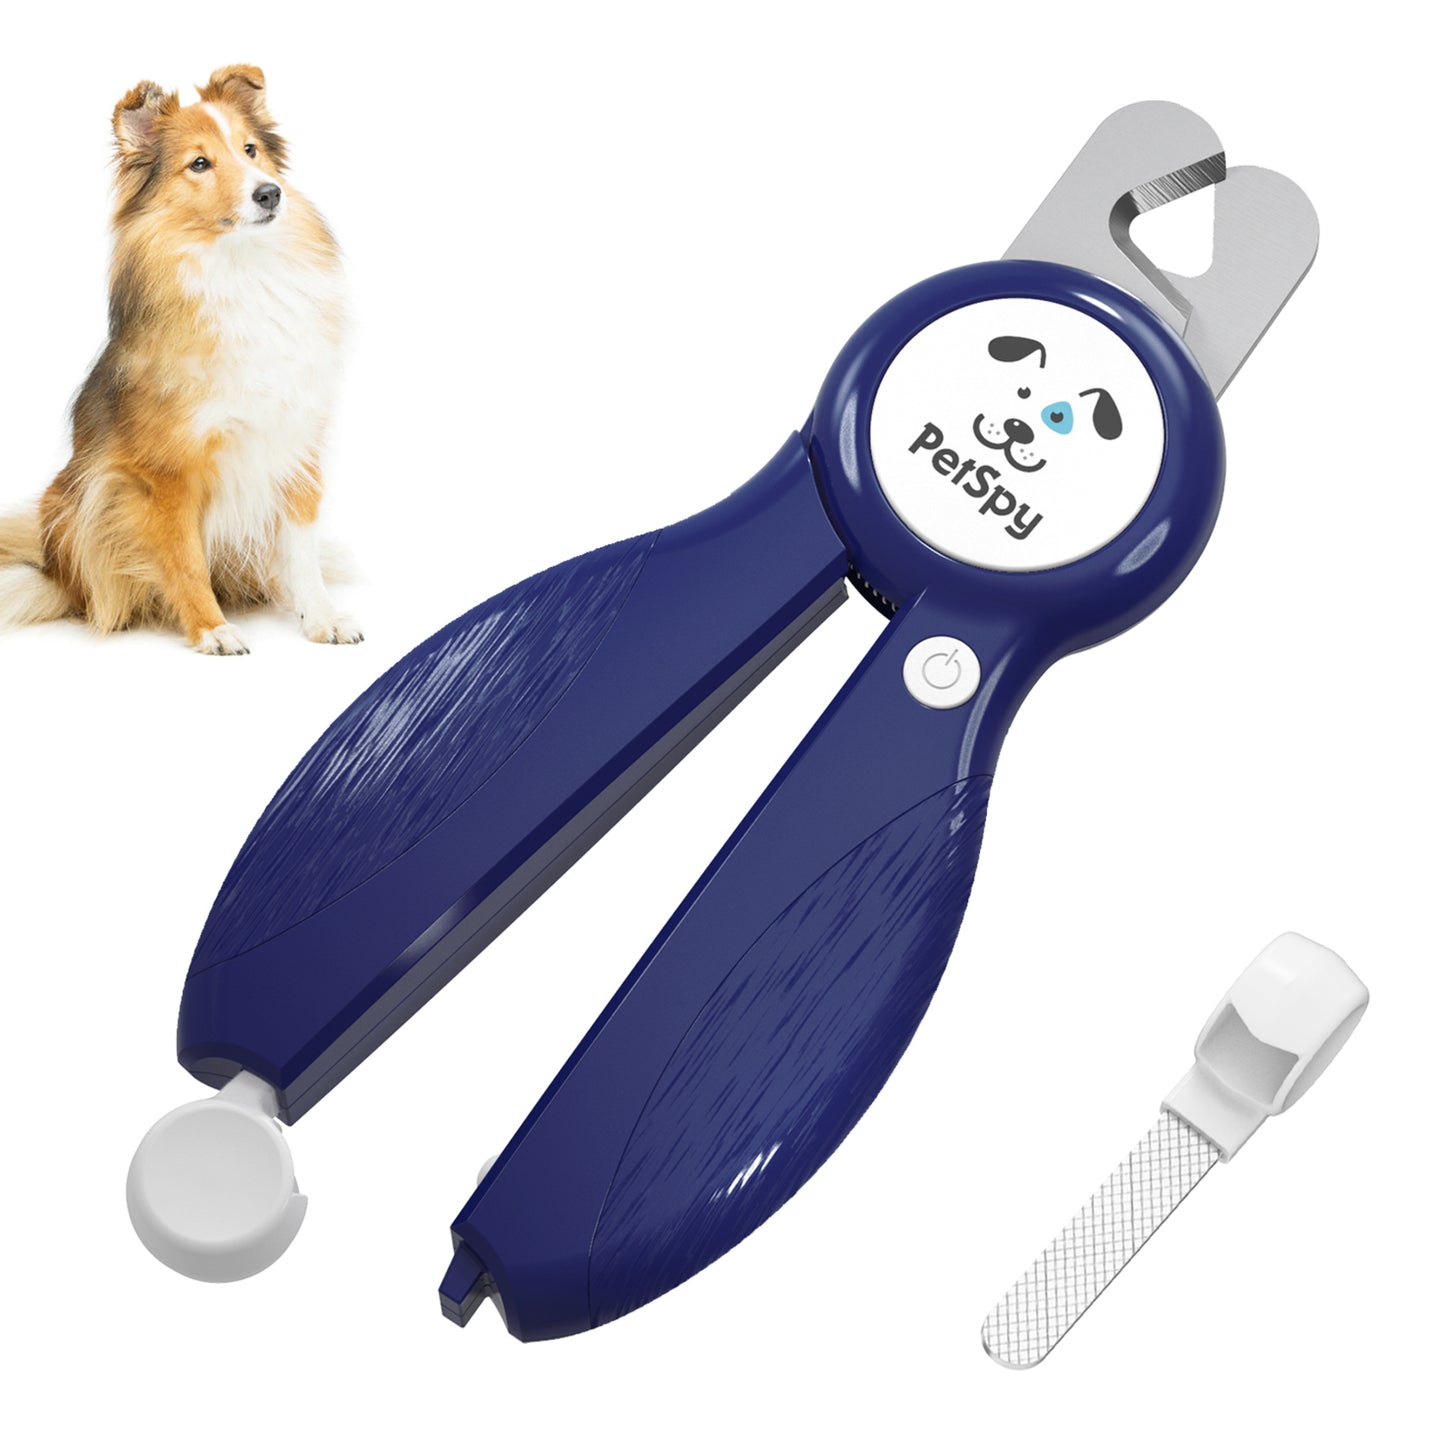 Dog Nail Clippers with Light - LED dog nail trimmer with light_color dark blue